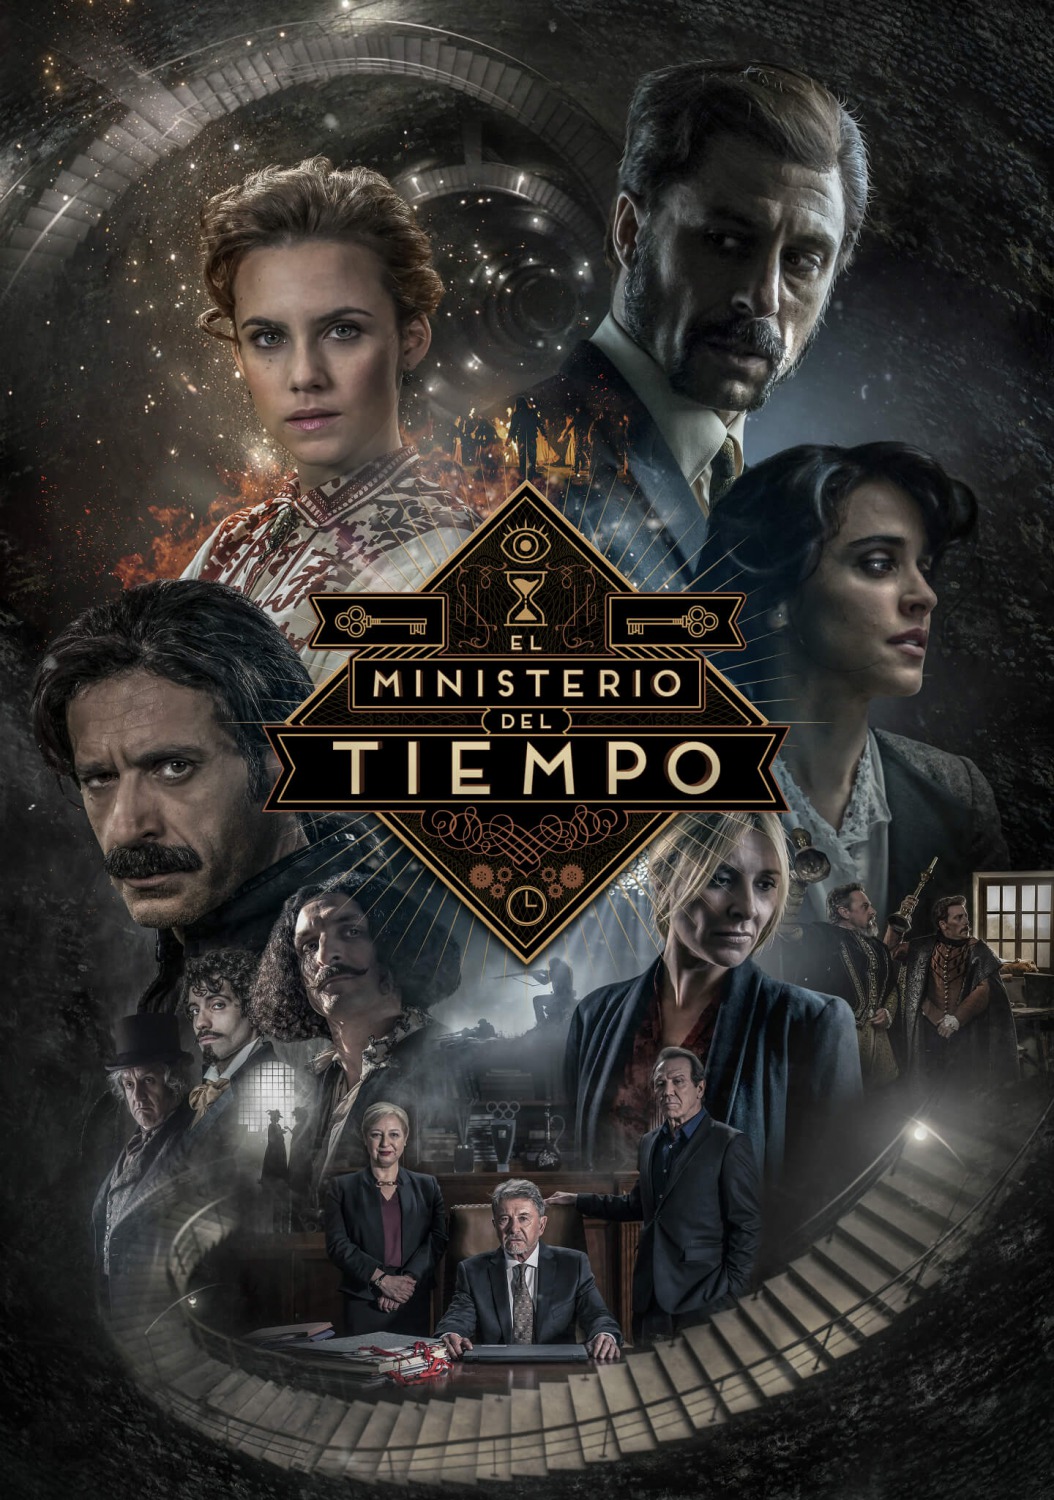 Extra Large TV Poster Image for El ministerio del tiempo (#1 of 2)